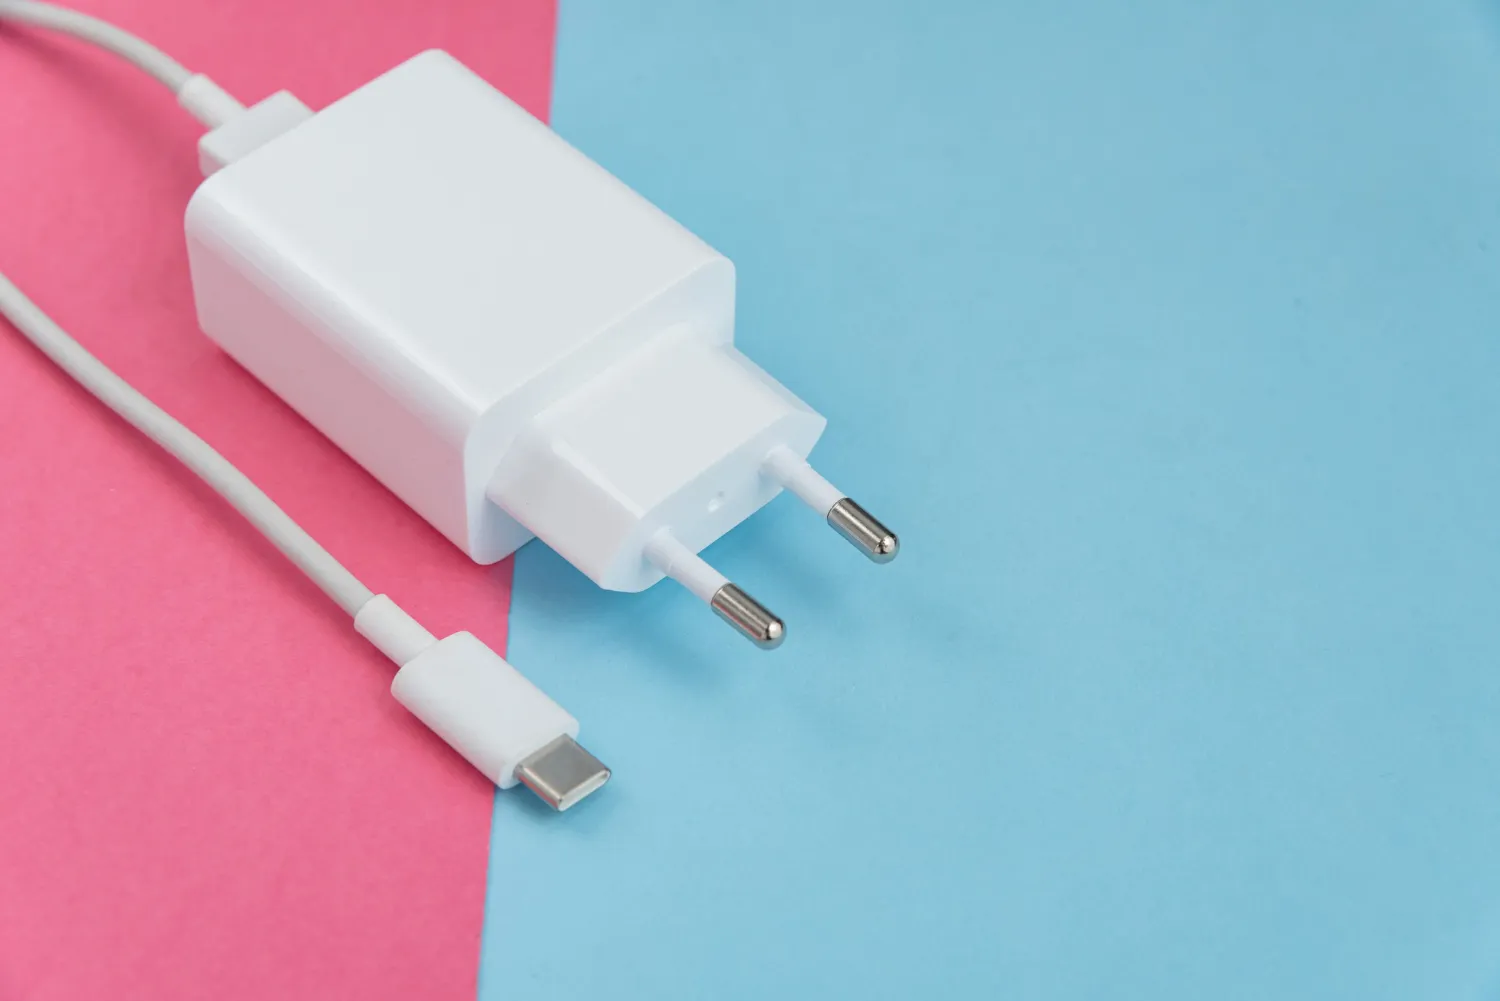 What Features Should You Look for in a USB-C Adapter?